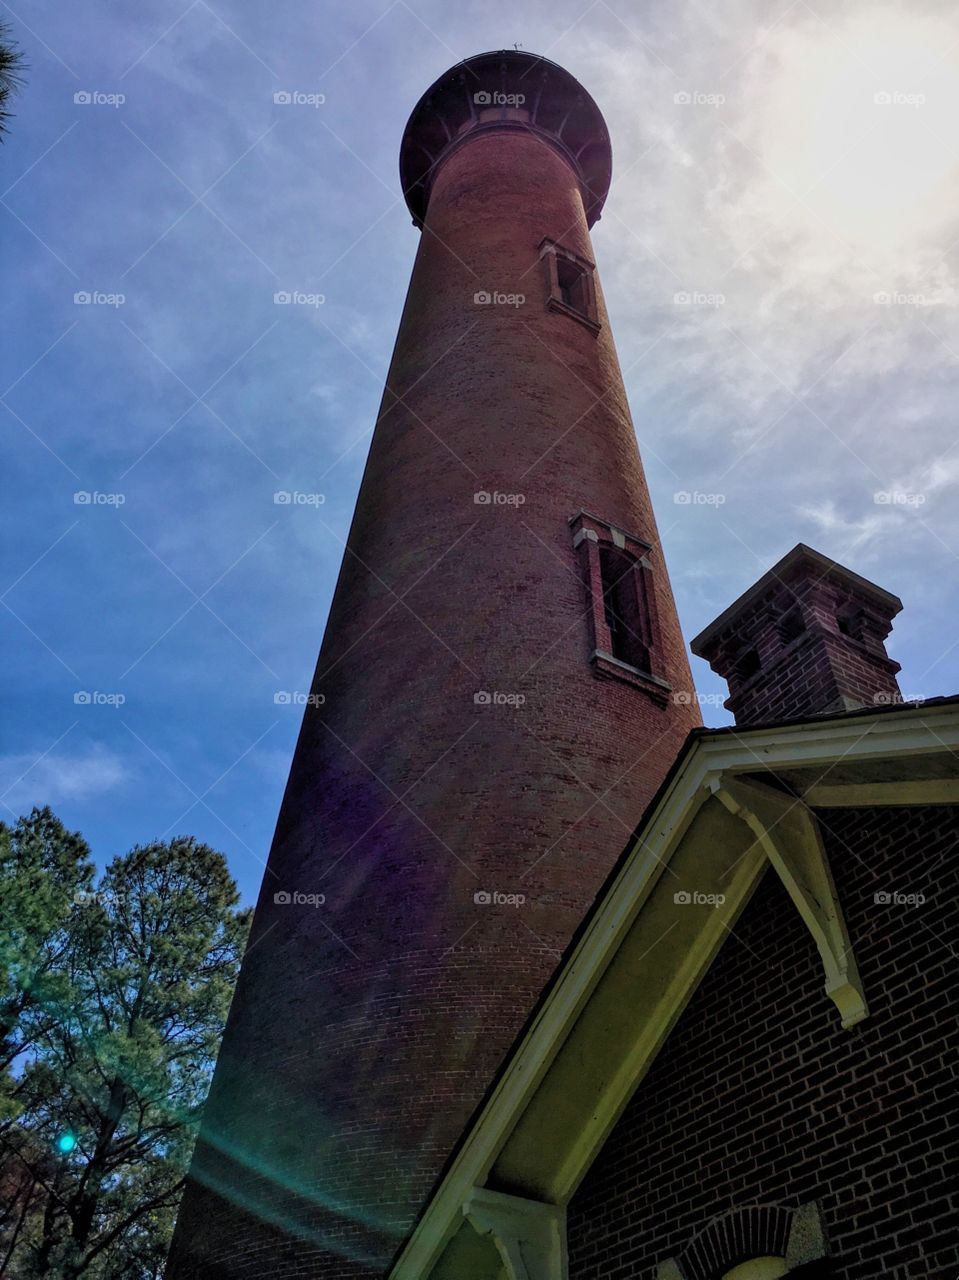 Currituck Lighthouse in the Outer Banks of North Carolina 